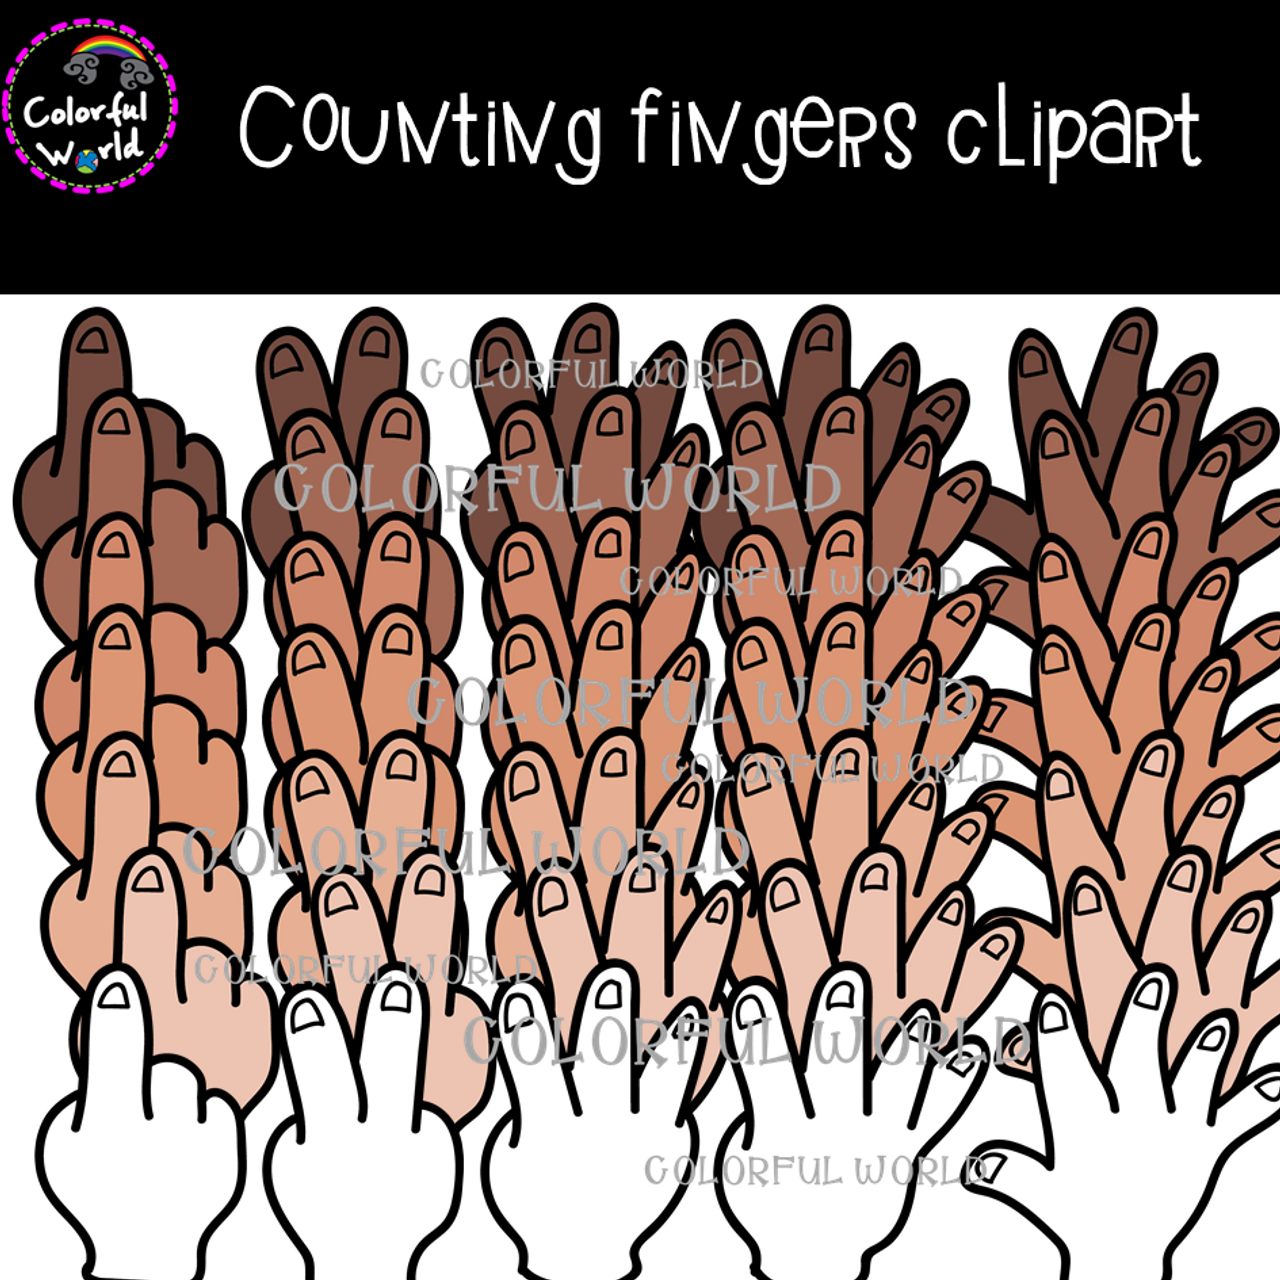 Counting fingers clipart